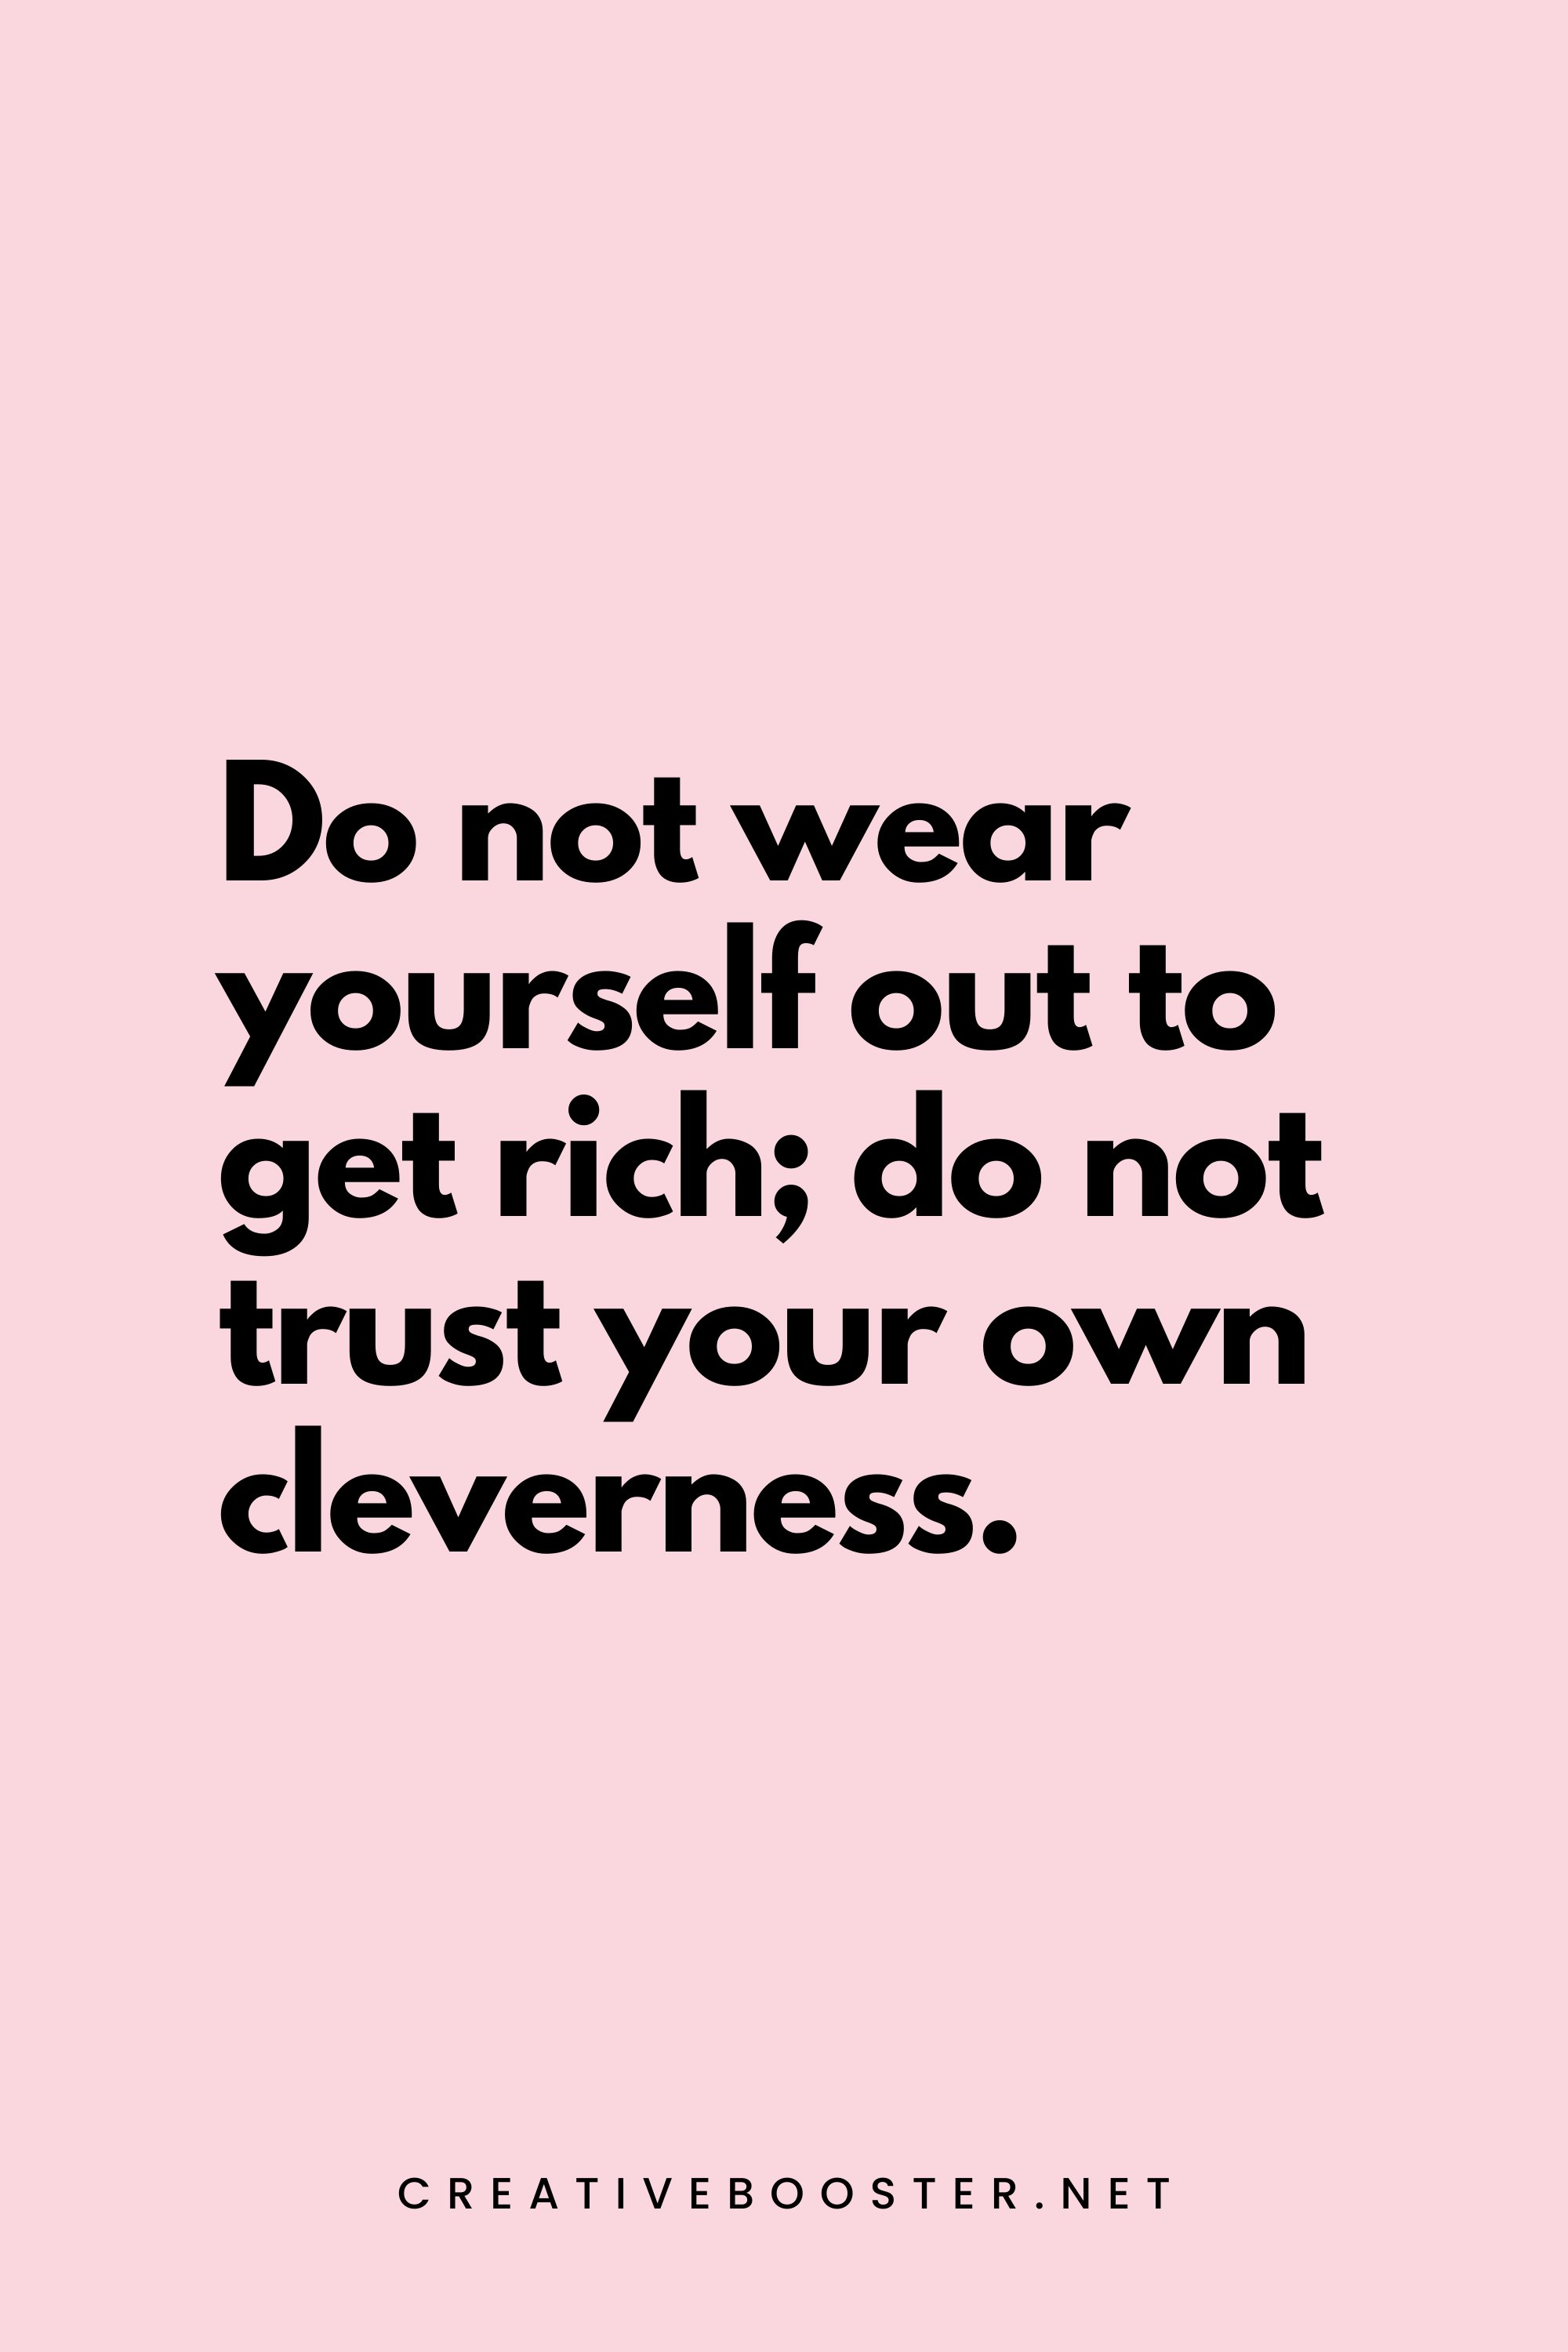 51. Do not wear yourself out to get rich; do not trust your own cleverness. - Proverbs 23:4 - 5.